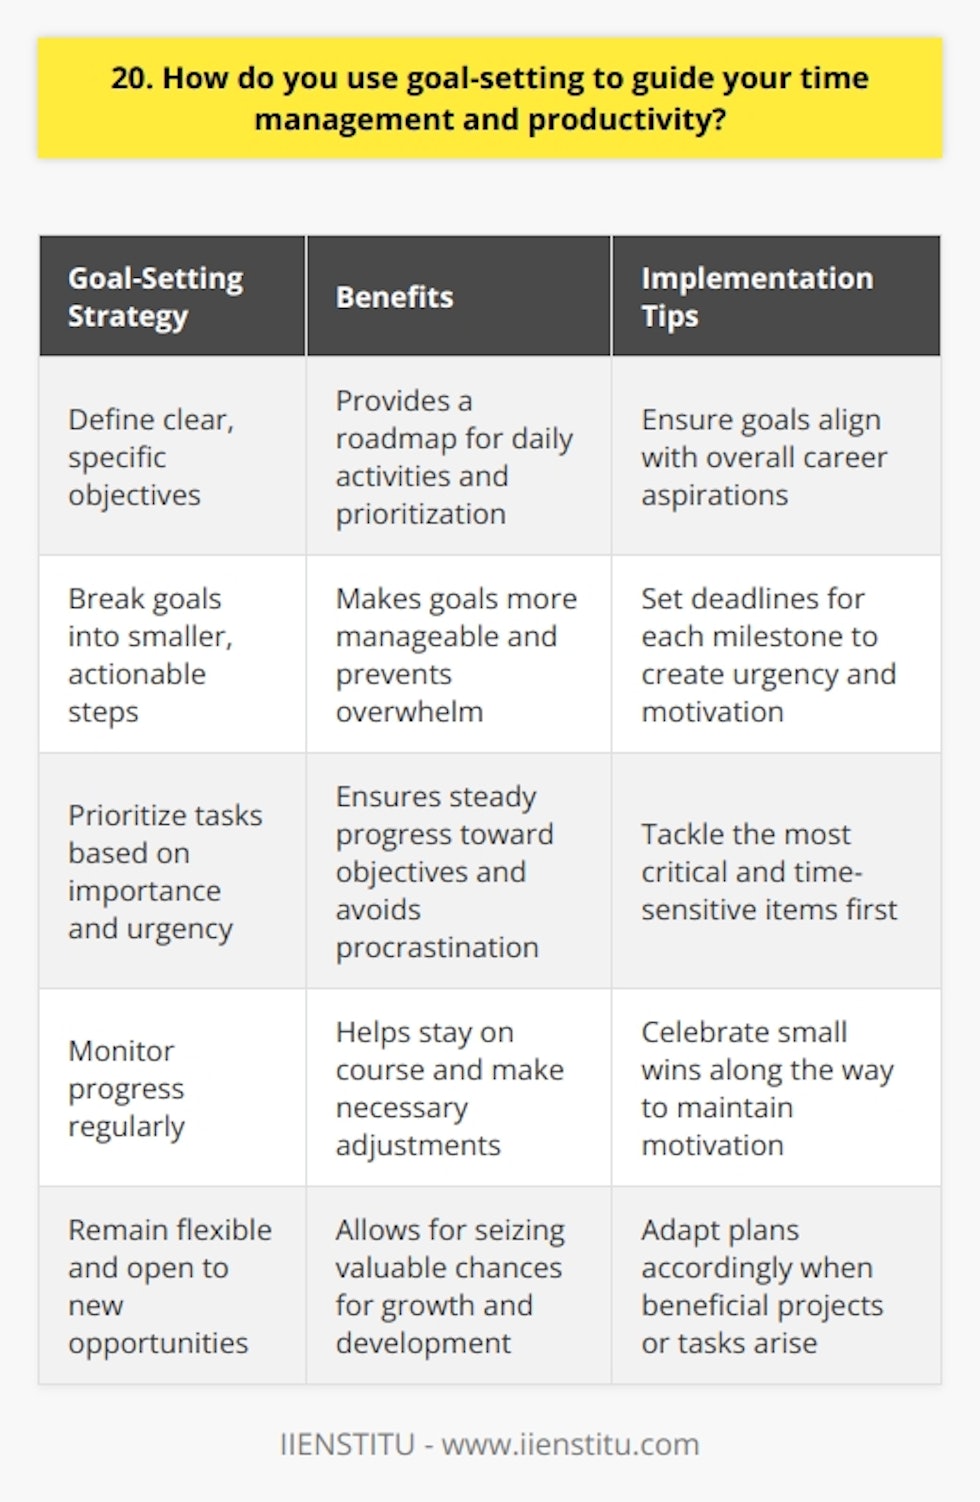 I believe that effective goal-setting is crucial for managing my time and maximizing productivity. I start by defining clear, specific objectives that align with my overall career aspirations. These goals serve as a roadmap, guiding my daily activities and helping me prioritize tasks. Breaking Down Goals To make my goals more manageable, I break them down into smaller, actionable steps. This allows me to focus on one thing at a time and avoid feeling overwhelmed. I set deadlines for each milestone, which creates a sense of urgency and motivation. Prioritizing Tasks With my goals in mind, I prioritize my tasks based on their importance and urgency. I tackle the most critical and time-sensitive items first, ensuring that I make steady progress toward my objectives. This approach helps me avoid procrastination and stay on track. Monitoring Progress I regularly monitor my progress to ensure that Im staying on course. If I encounter obstacles or fall behind, I reassess my strategy and make adjustments as needed. Celebrating small wins along the way keeps me motivated and reinforces the value of goal-setting. Staying Flexible While having well-defined goals is essential, I also remain flexible and open to new opportunities. If a project or task arises that aligns with my overall objectives, Im willing to adapt my plan accordingly. This flexibility allows me to seize valuable chances for growth and development. In summary, goal-setting is a powerful tool that I use to guide my time management and productivity. By setting clear objectives, breaking them down into manageable steps, prioritizing tasks, monitoring progress, and staying flexible, Im able to consistently achieve strong results and advance in my career.